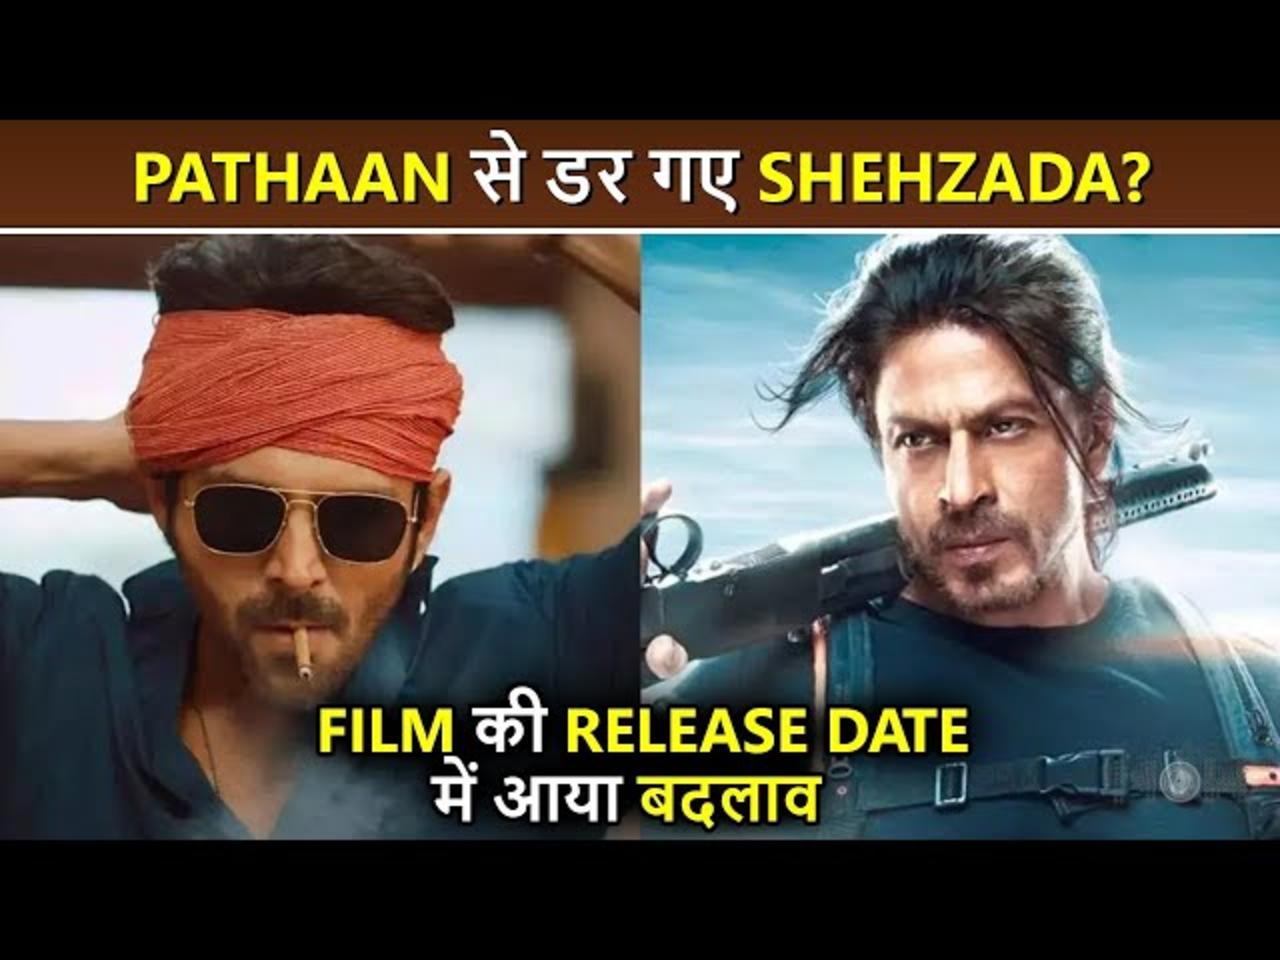 Pathaan Fever : Kartik Aaryan and Makers Scared To Release Shehzada? DATES PUSHED